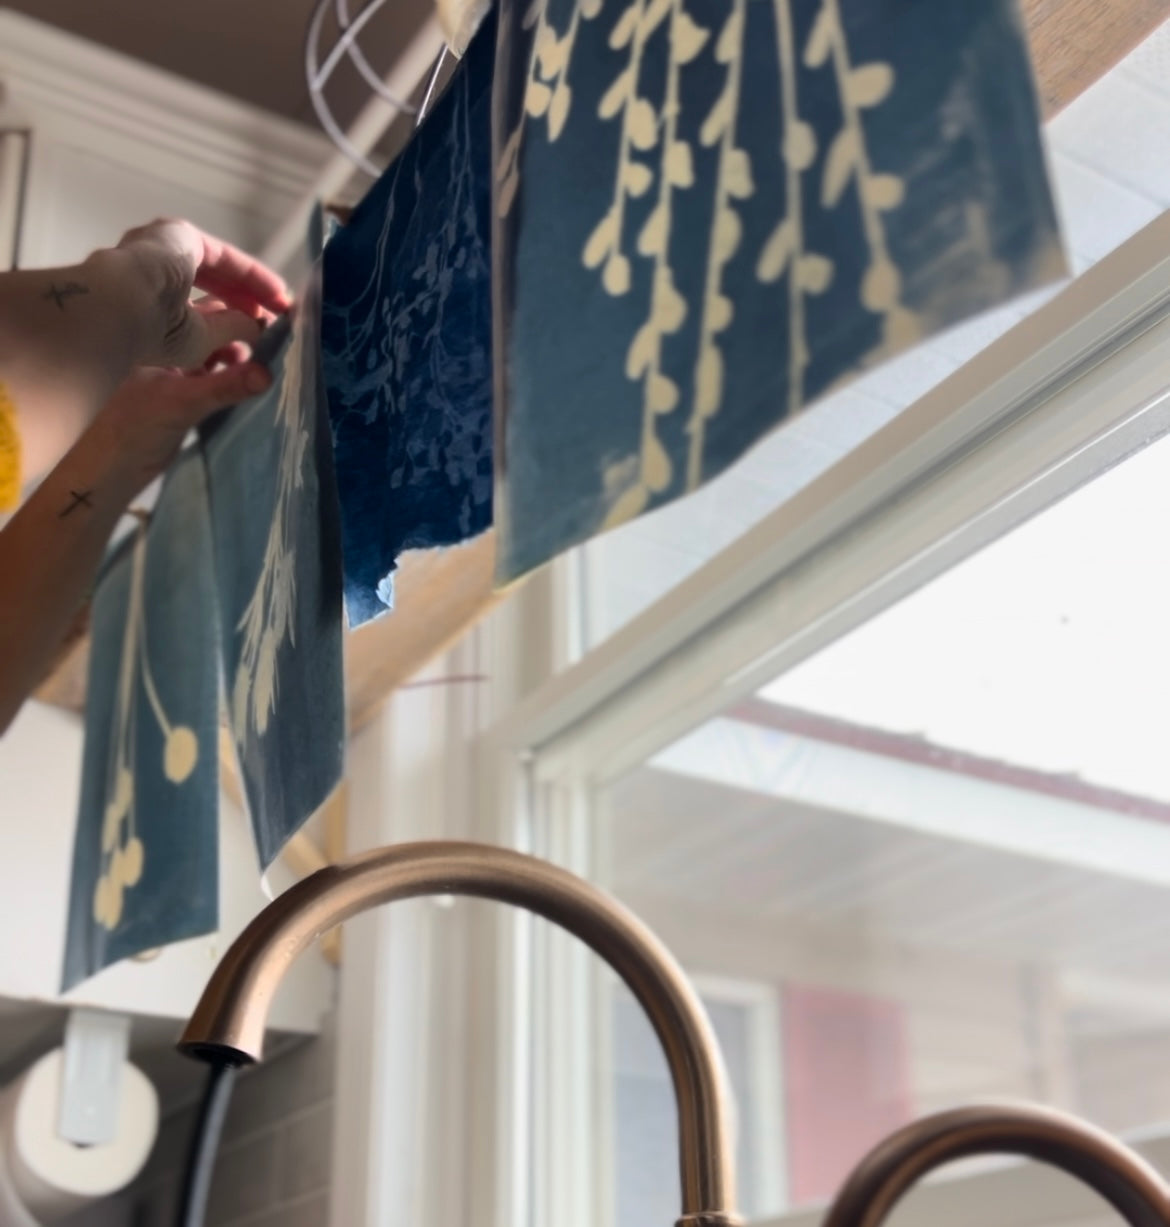 Cyanotype Workshop | Creating Beautiful Wearable Art and Printing with Photo Negatives